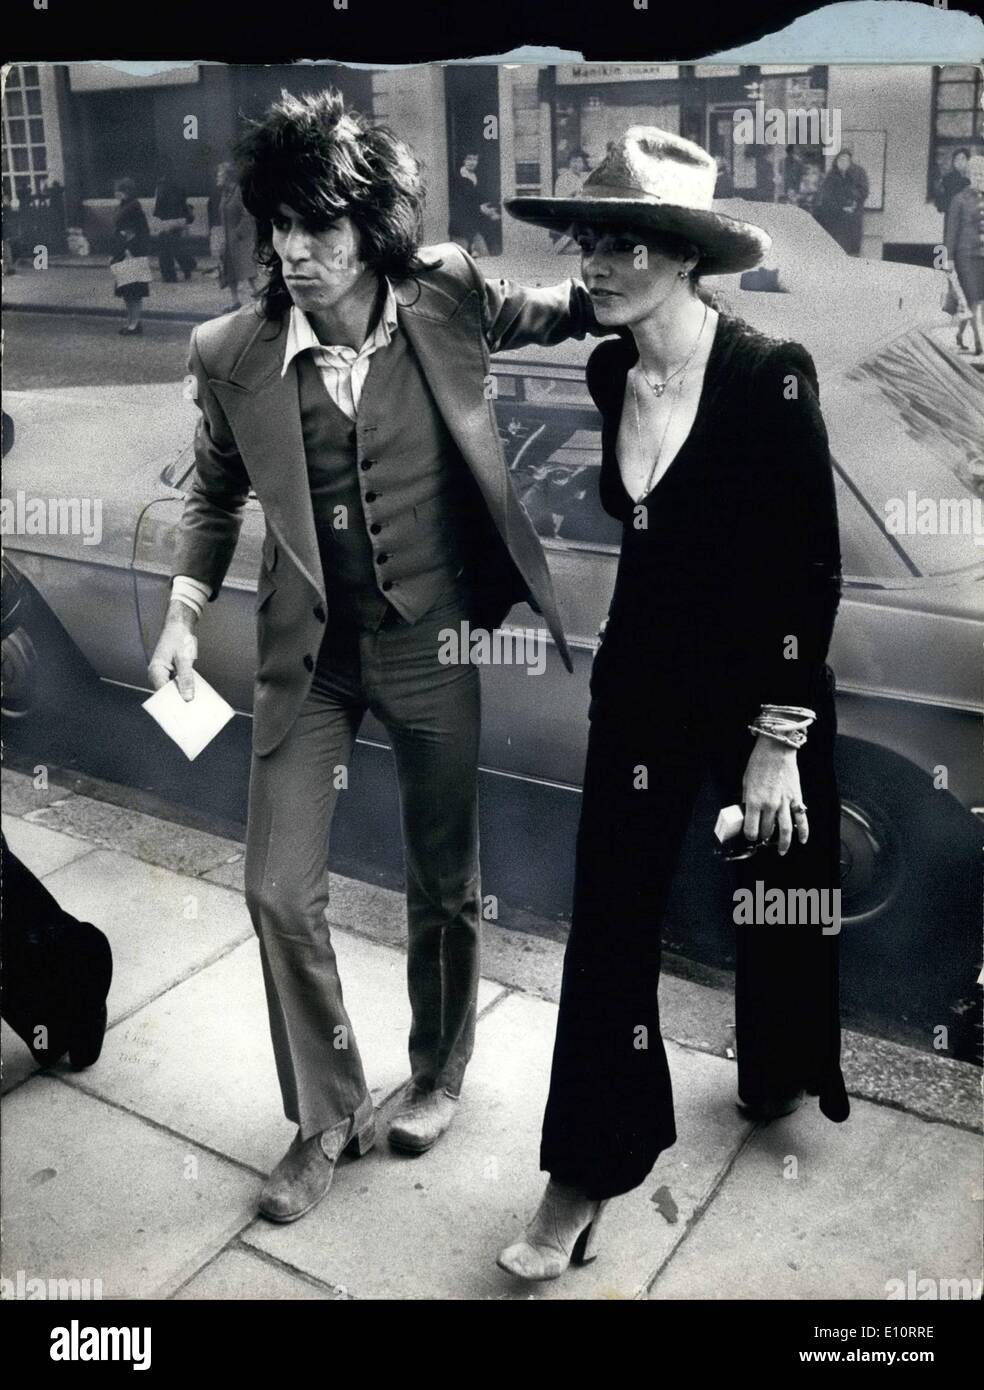 Oct. 24, 1973 - October 24th, 1973 Rolling Stone Keith Richards fined. Rolling Stone Keith Richards was at Marlborough Street Court today fined &pound;125 for gun and ammunition offences, and &pound;80 for drug offences, a total of &pound;205. His girlfriend Annita Pallenberg was given a conditional discharge on her drug offence. Photo Shows: Keith Richards and Anita Pallenberg on their way to court today. Stock Photo